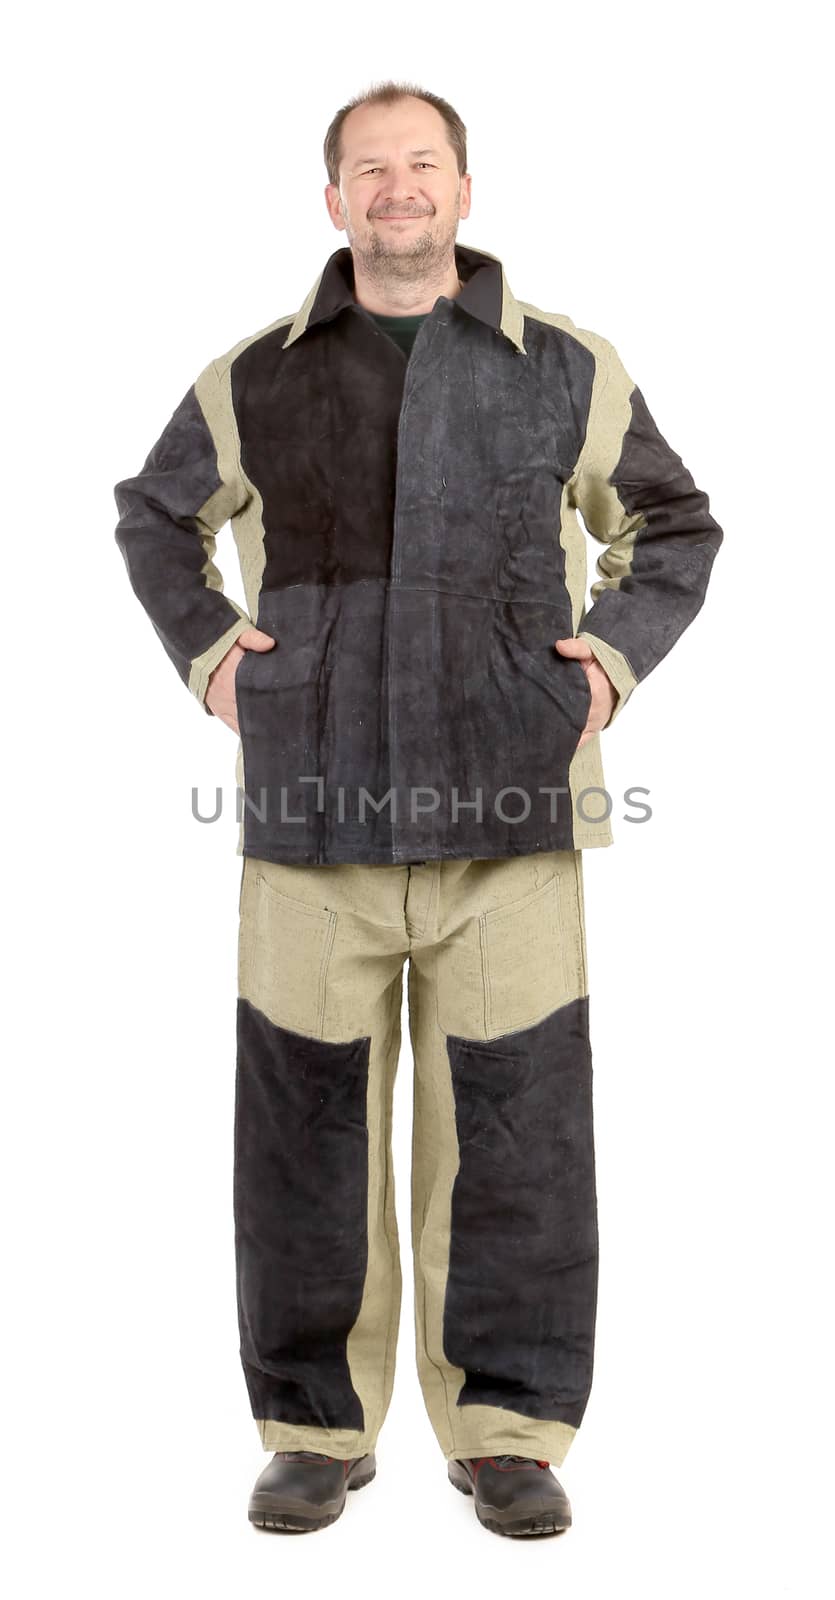 Welder in workwear suit. Isolated on a white background.